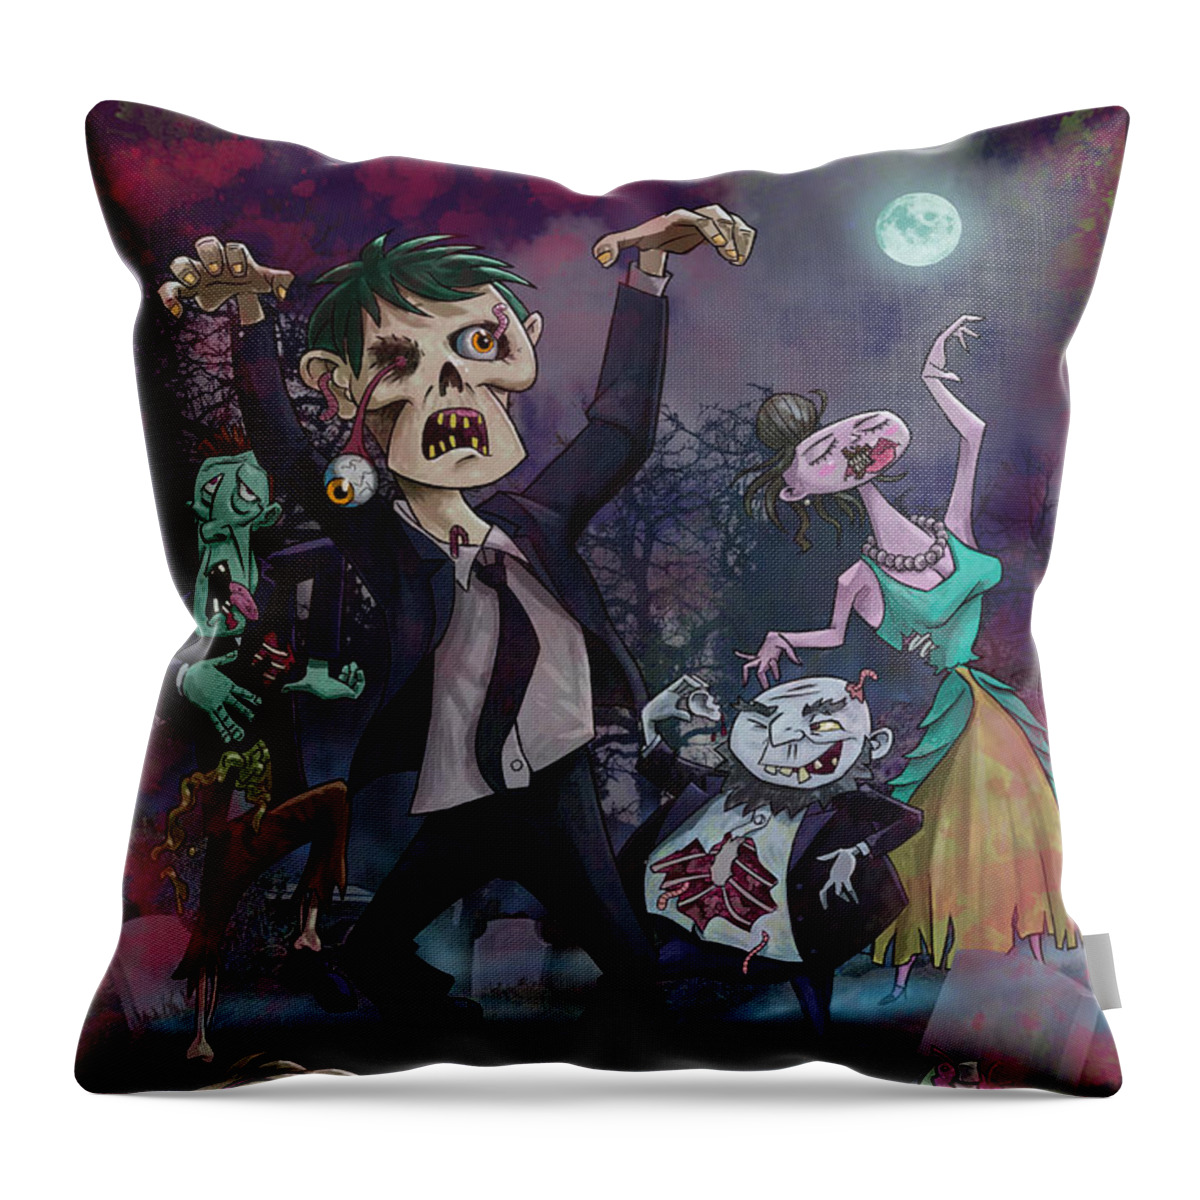 Zombie Throw Pillow featuring the digital art Cartoon Zombie Party by Martin Davey